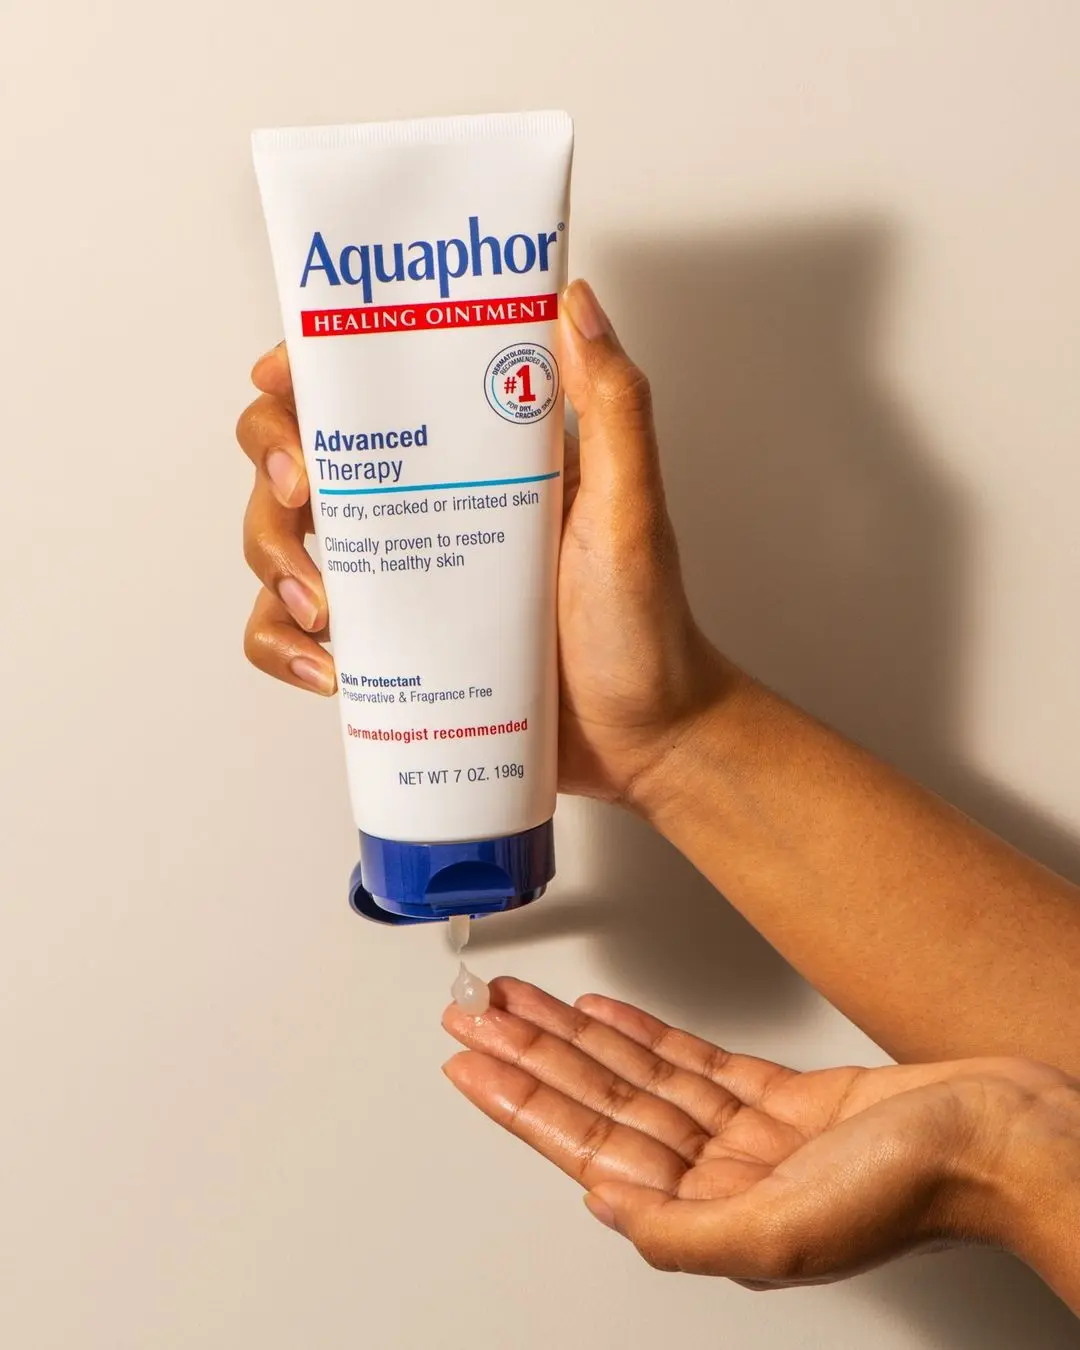 Everything You Need to Know About Aquaphor in One Place